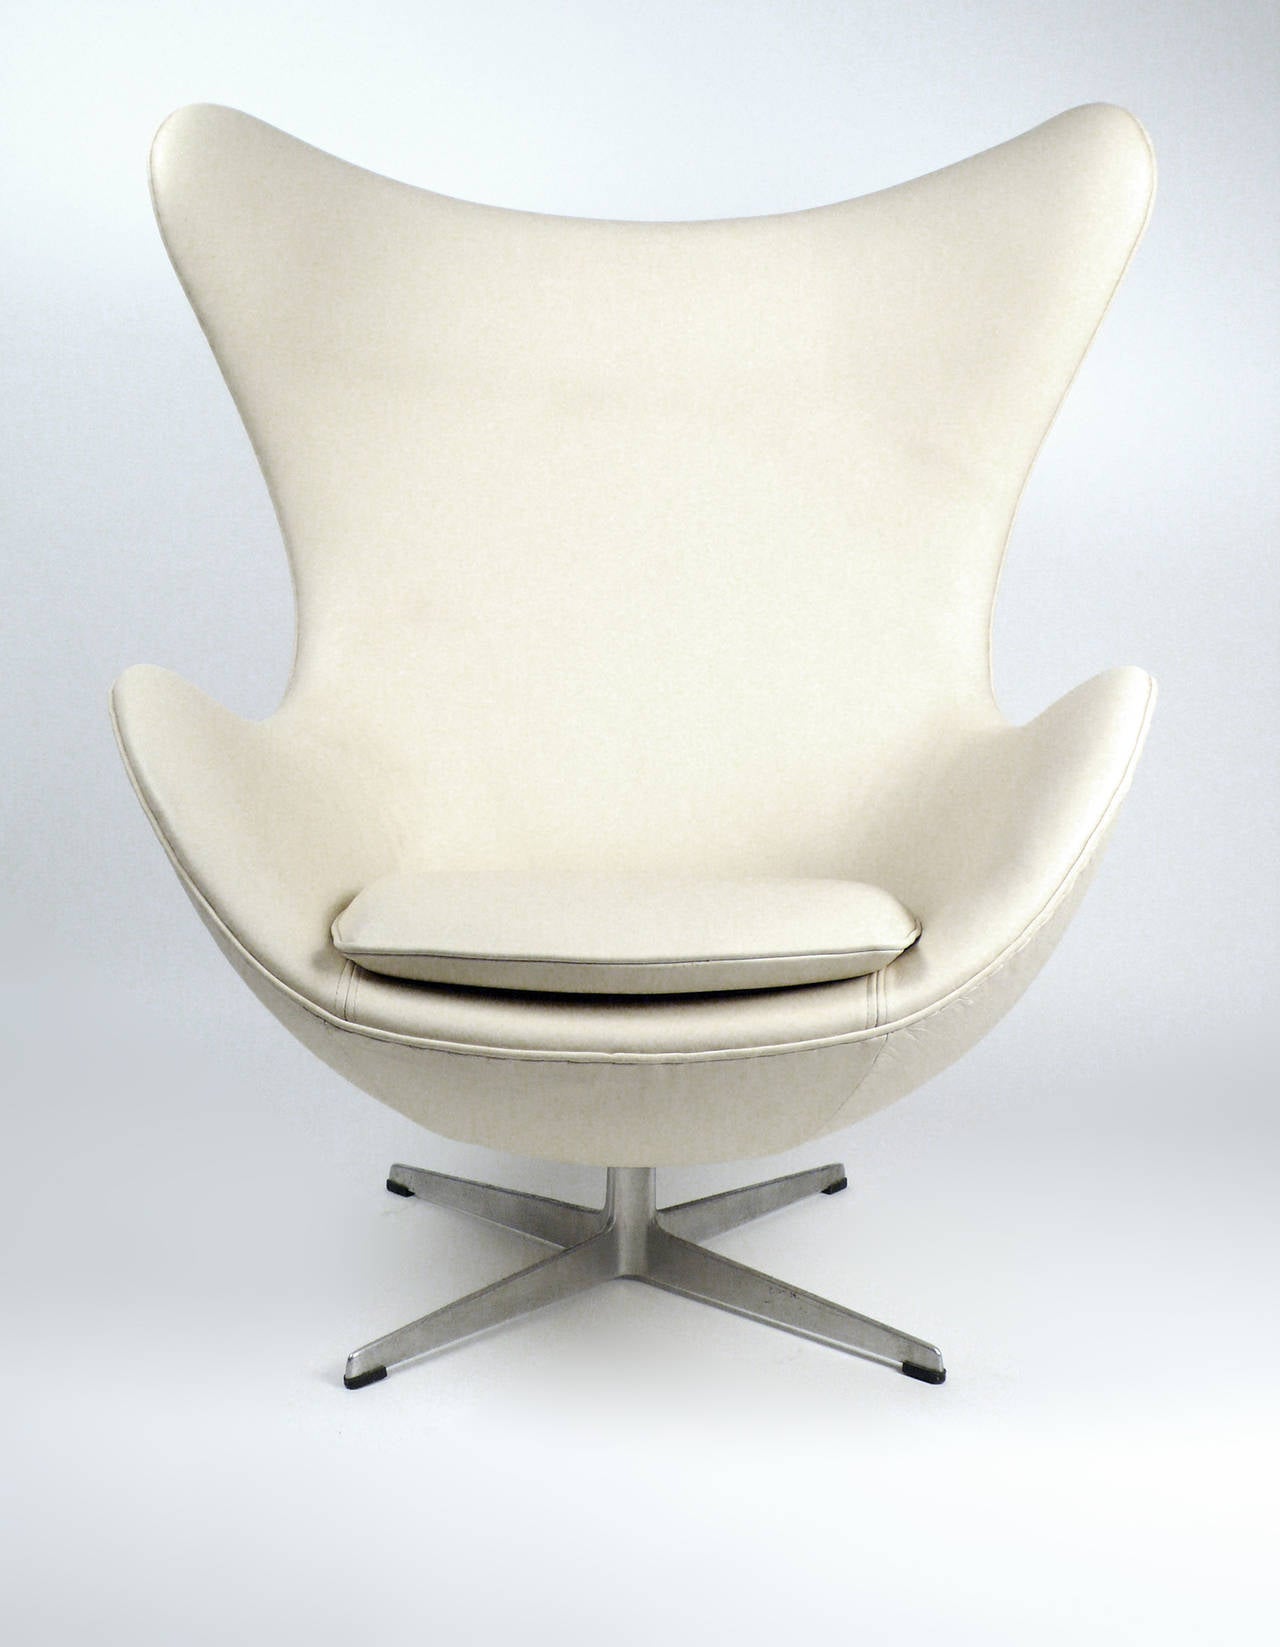 Early Production Egg Chair with matching ottoman designd by Arne Jacobsen produced by Fritz Hansen - Denmark. Rencently upholstered in a beautiful creme Spinnybeck leather. Matching pair availble.